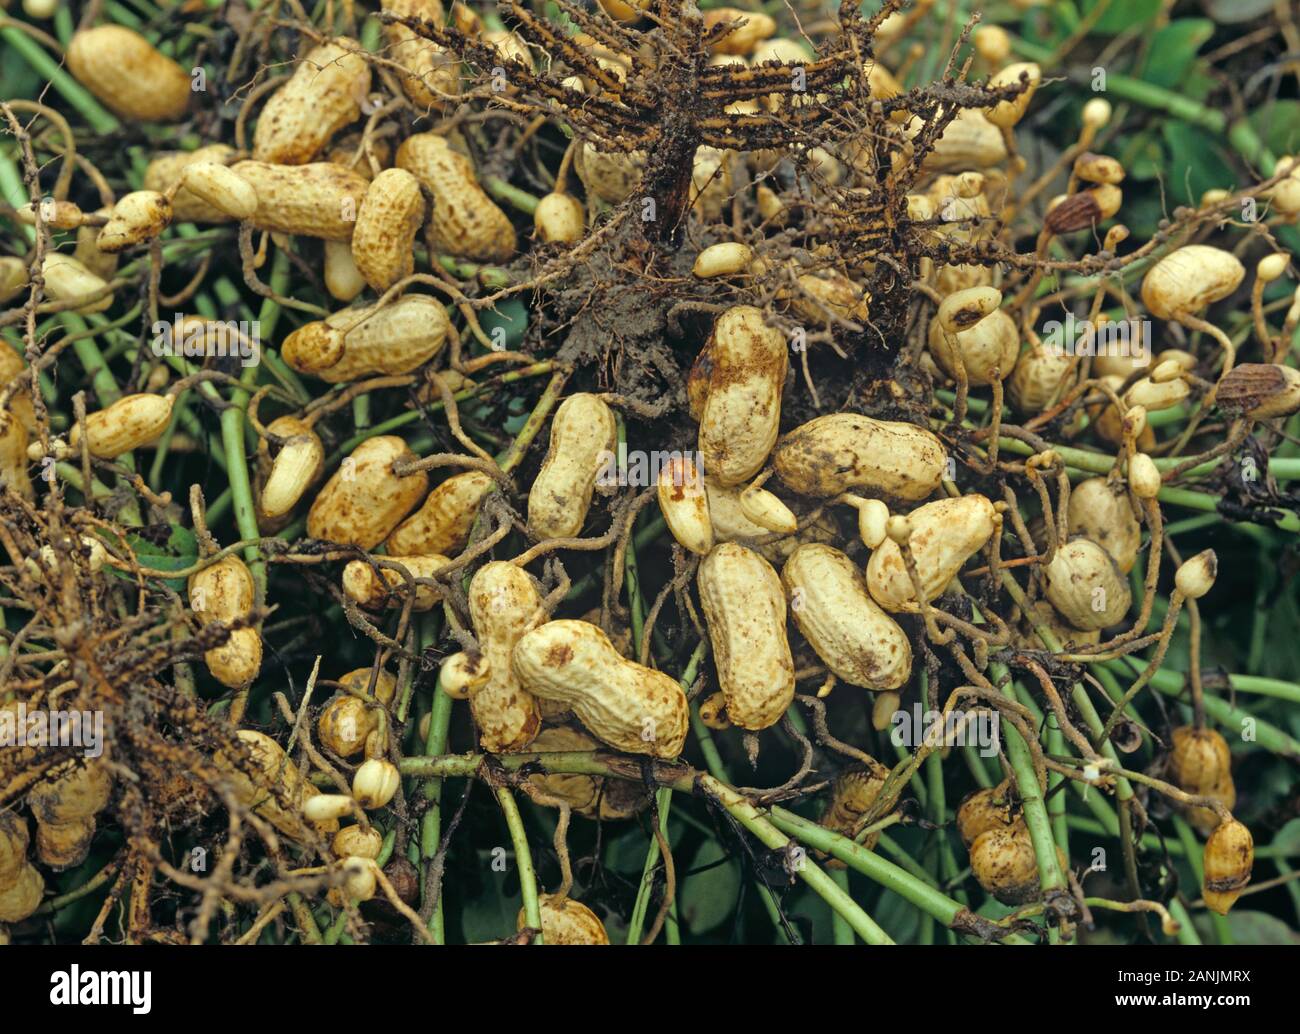 Peanuts or groundnuts turned over before the nuts are collected and harvested, North Caroline, USA, October Stock Photo